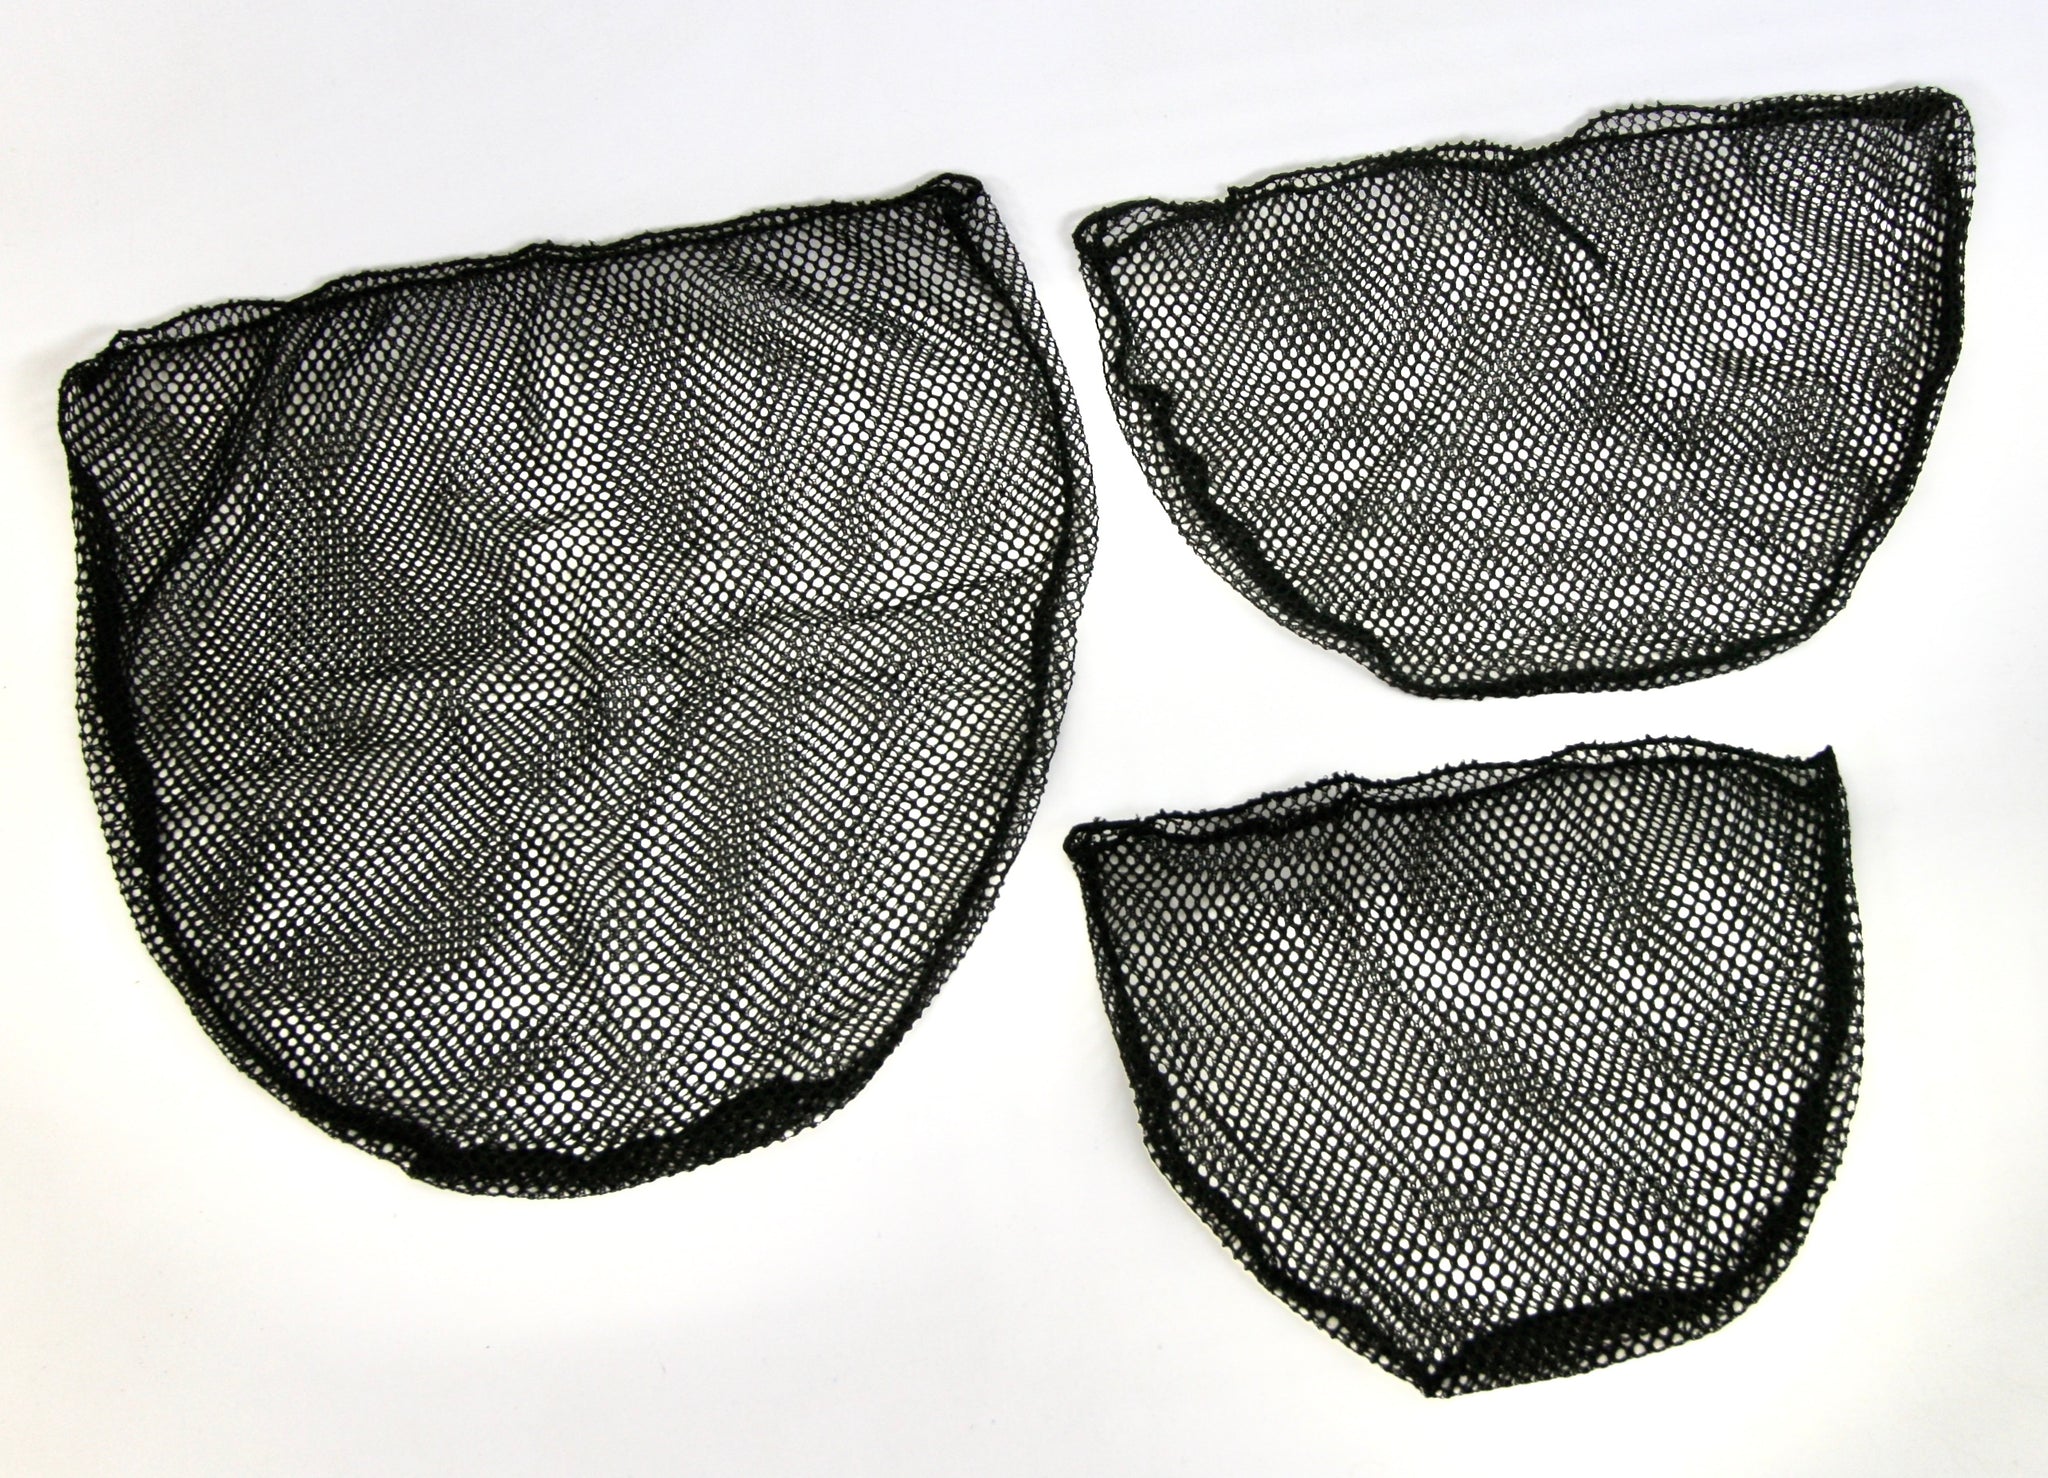 Soft nylon catch and release, landing net bags. Made in the USA